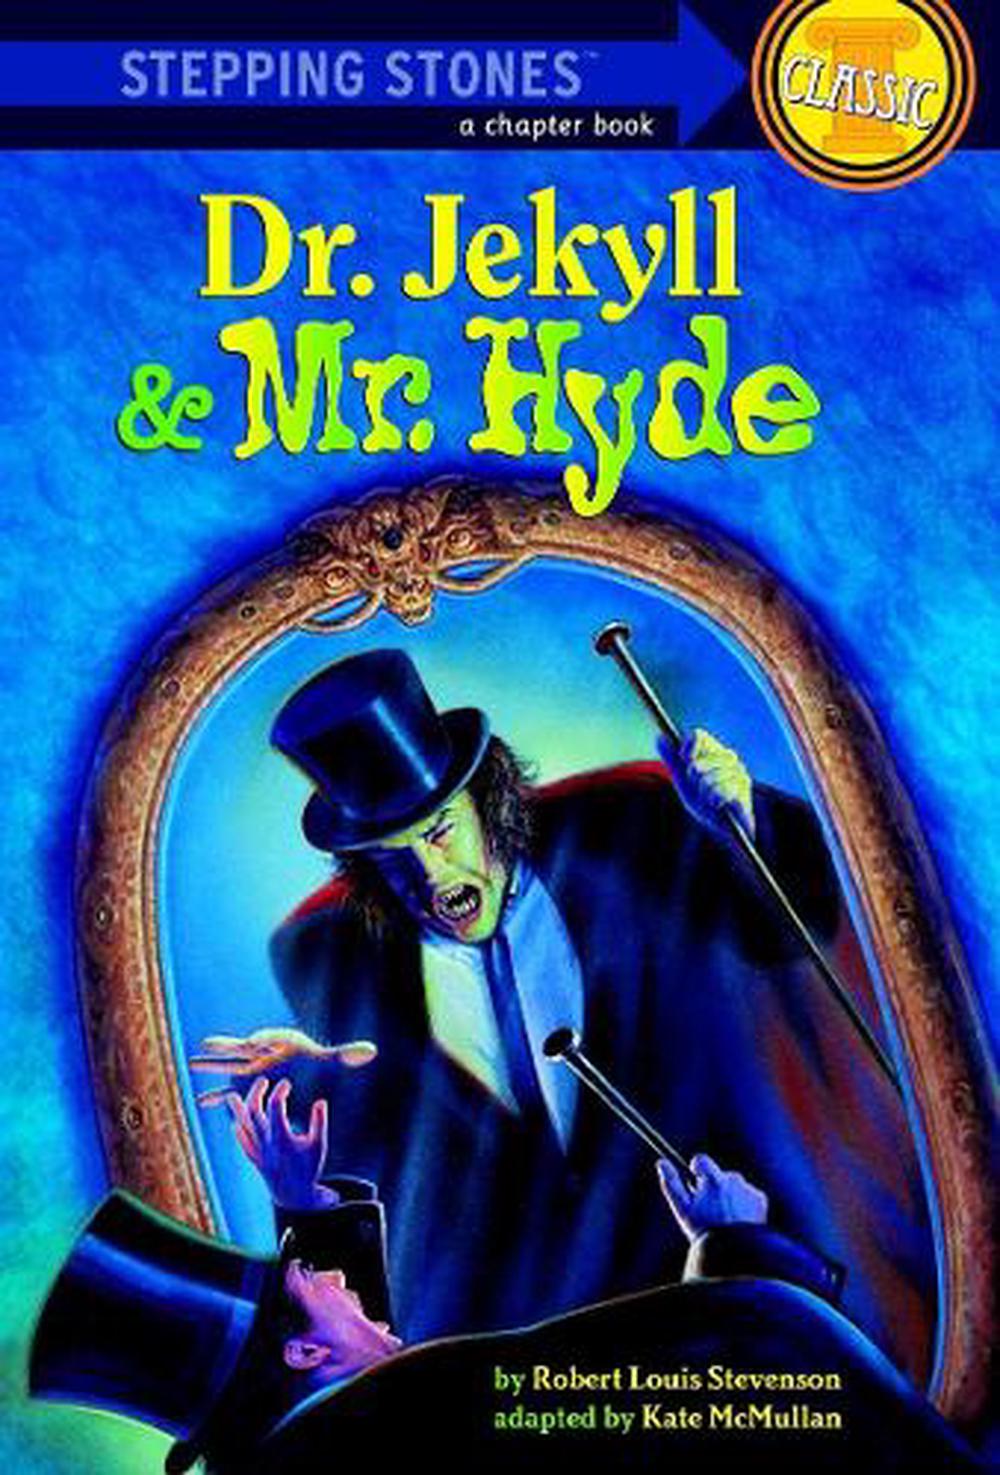 dr-jekyll-and-mr-hyde-book-online-level-5-the-strange-case-of-dr-jekyll-and-mr-hyde-von-robert